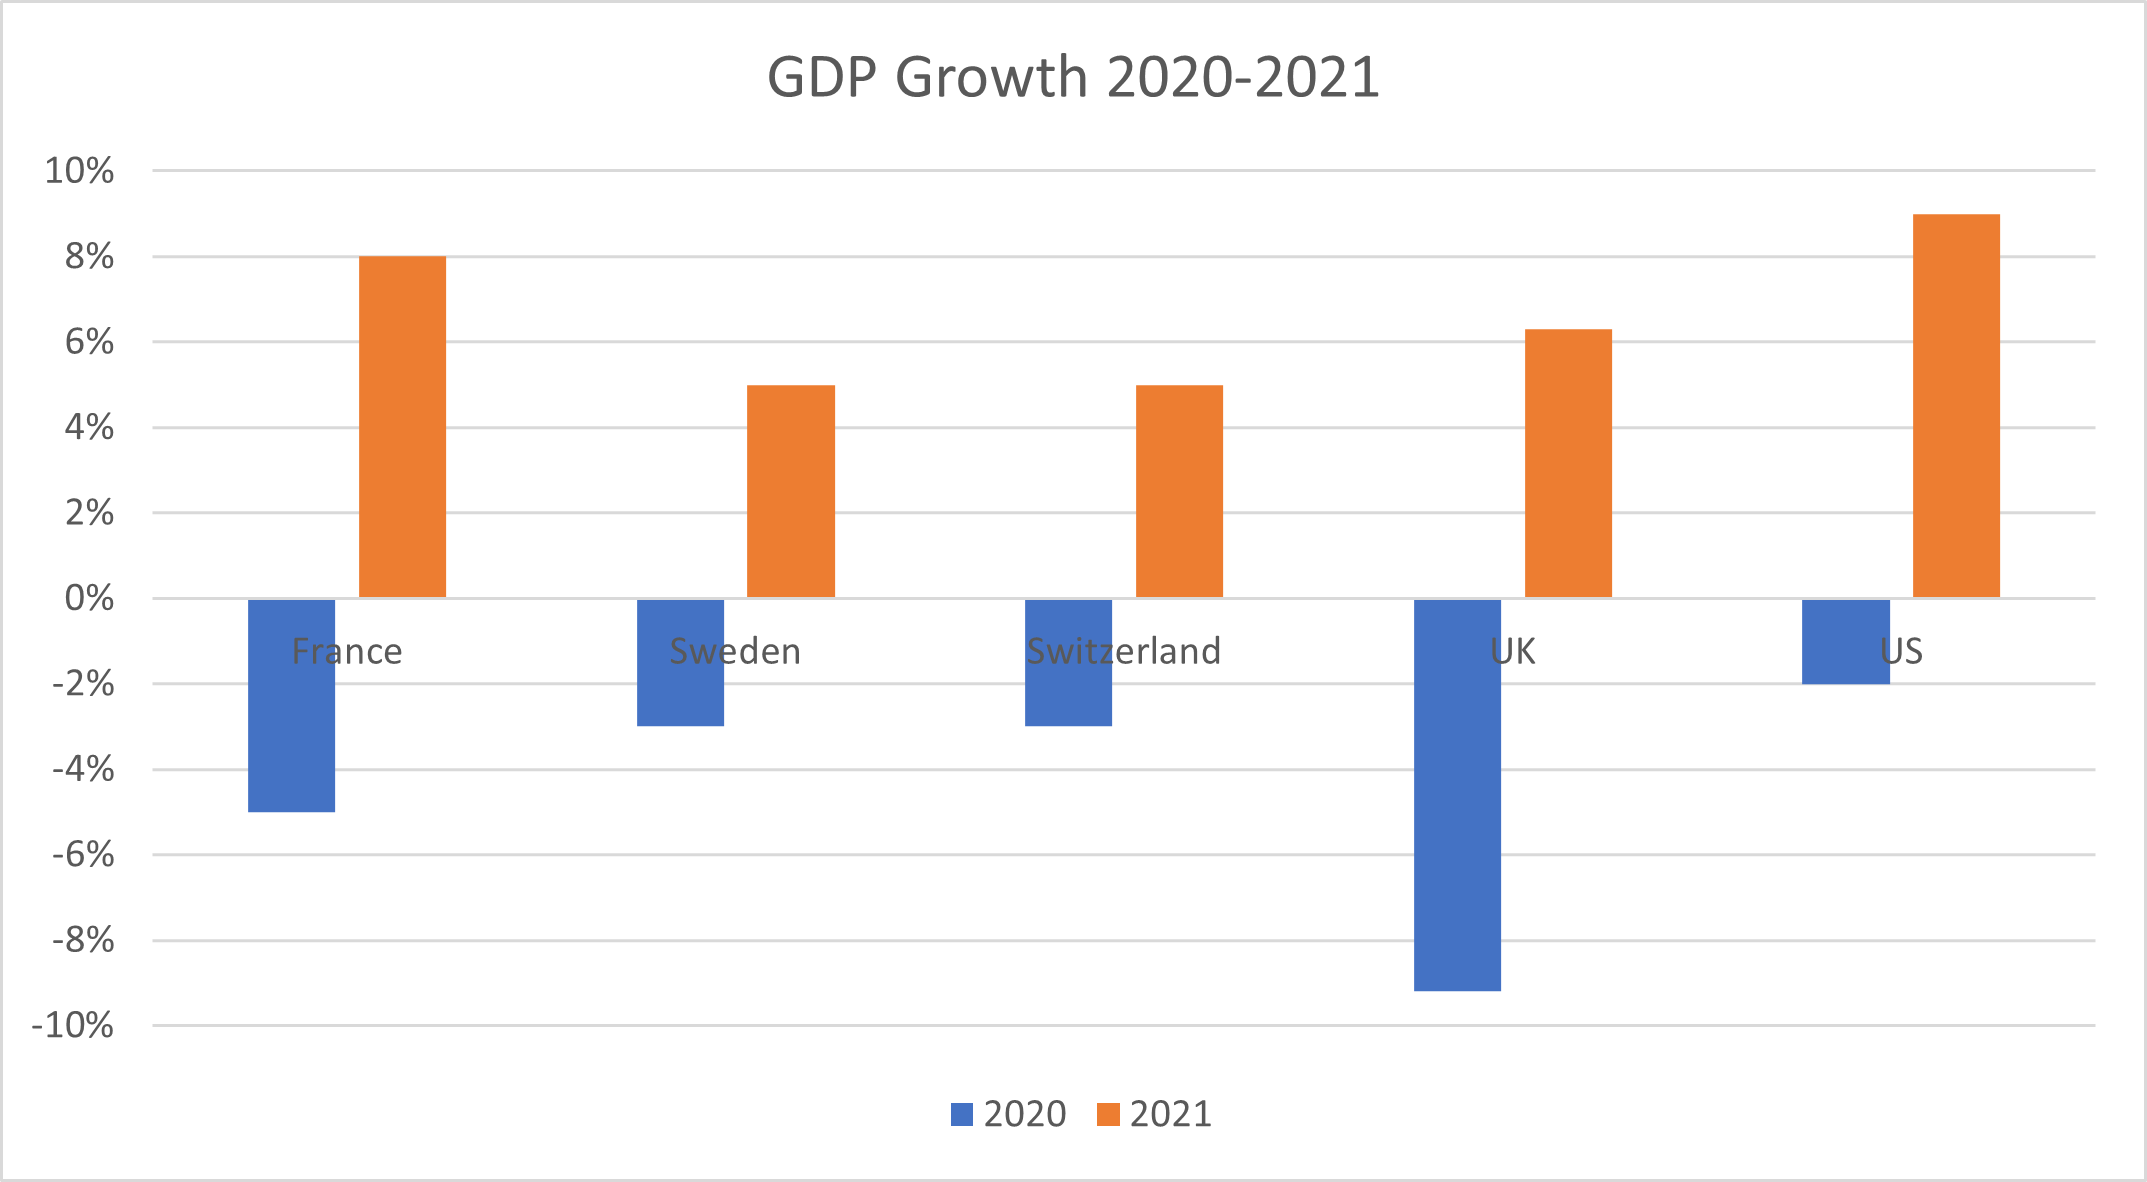 GDP Growth Rates in 2020 and 2021